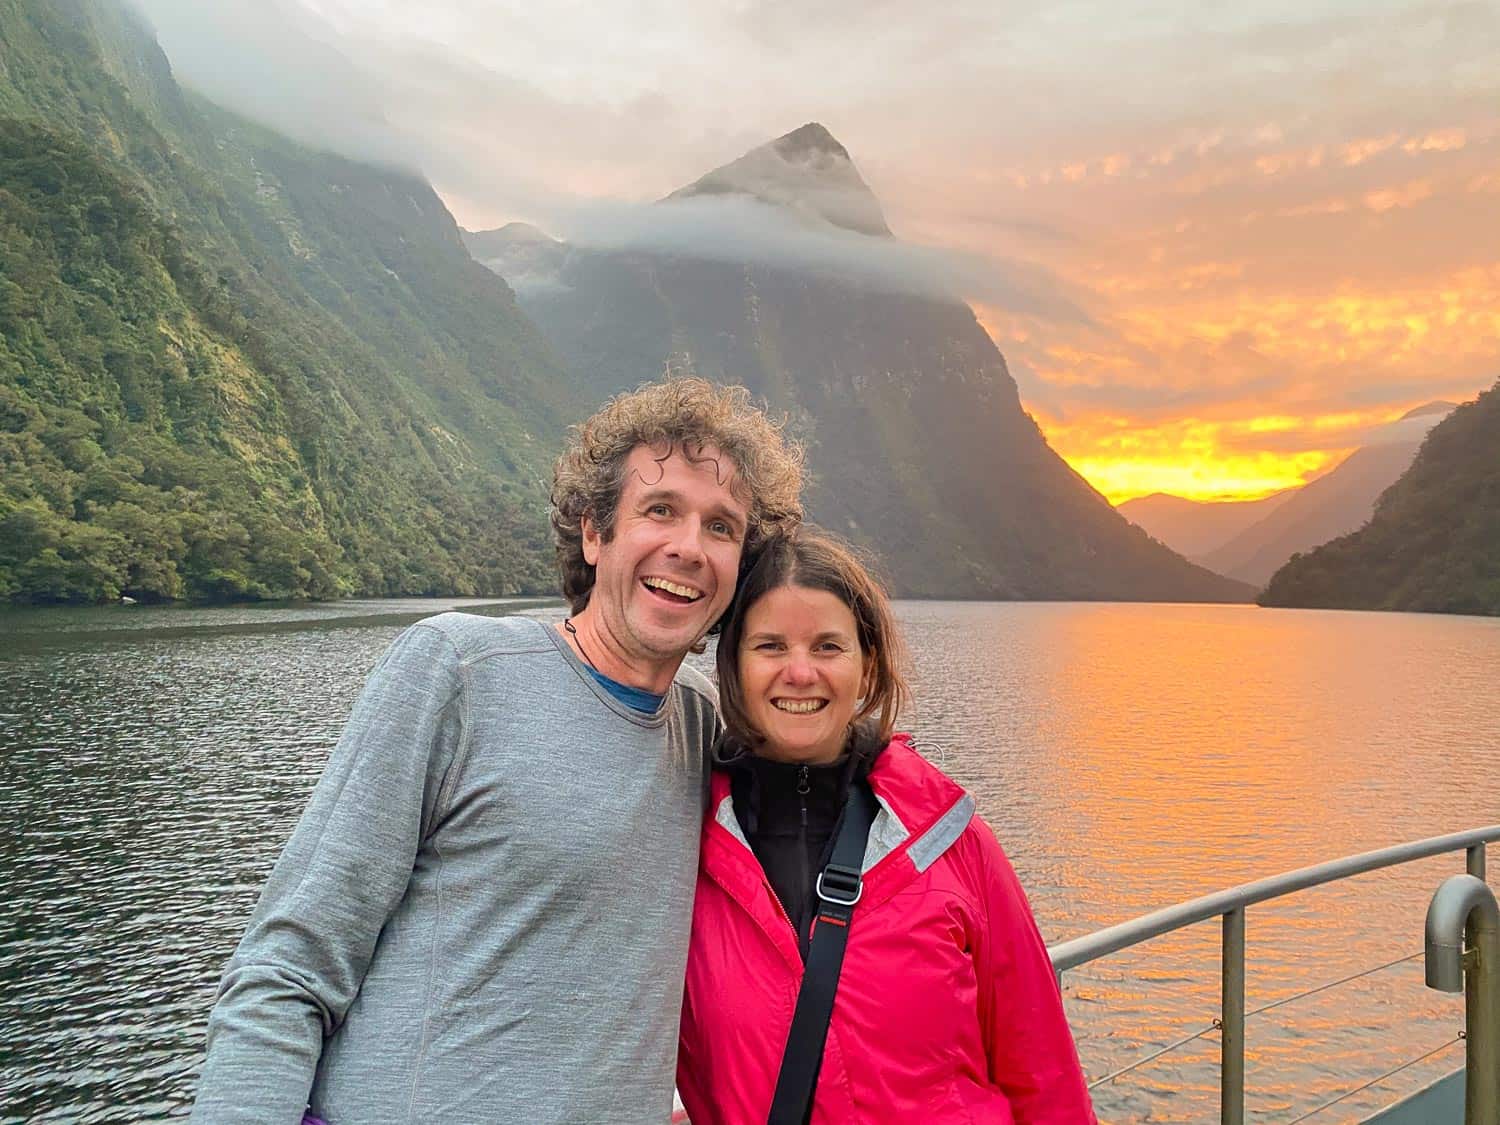 Simon and Erin at sunset on an overnight cruise in Doubtful Sound